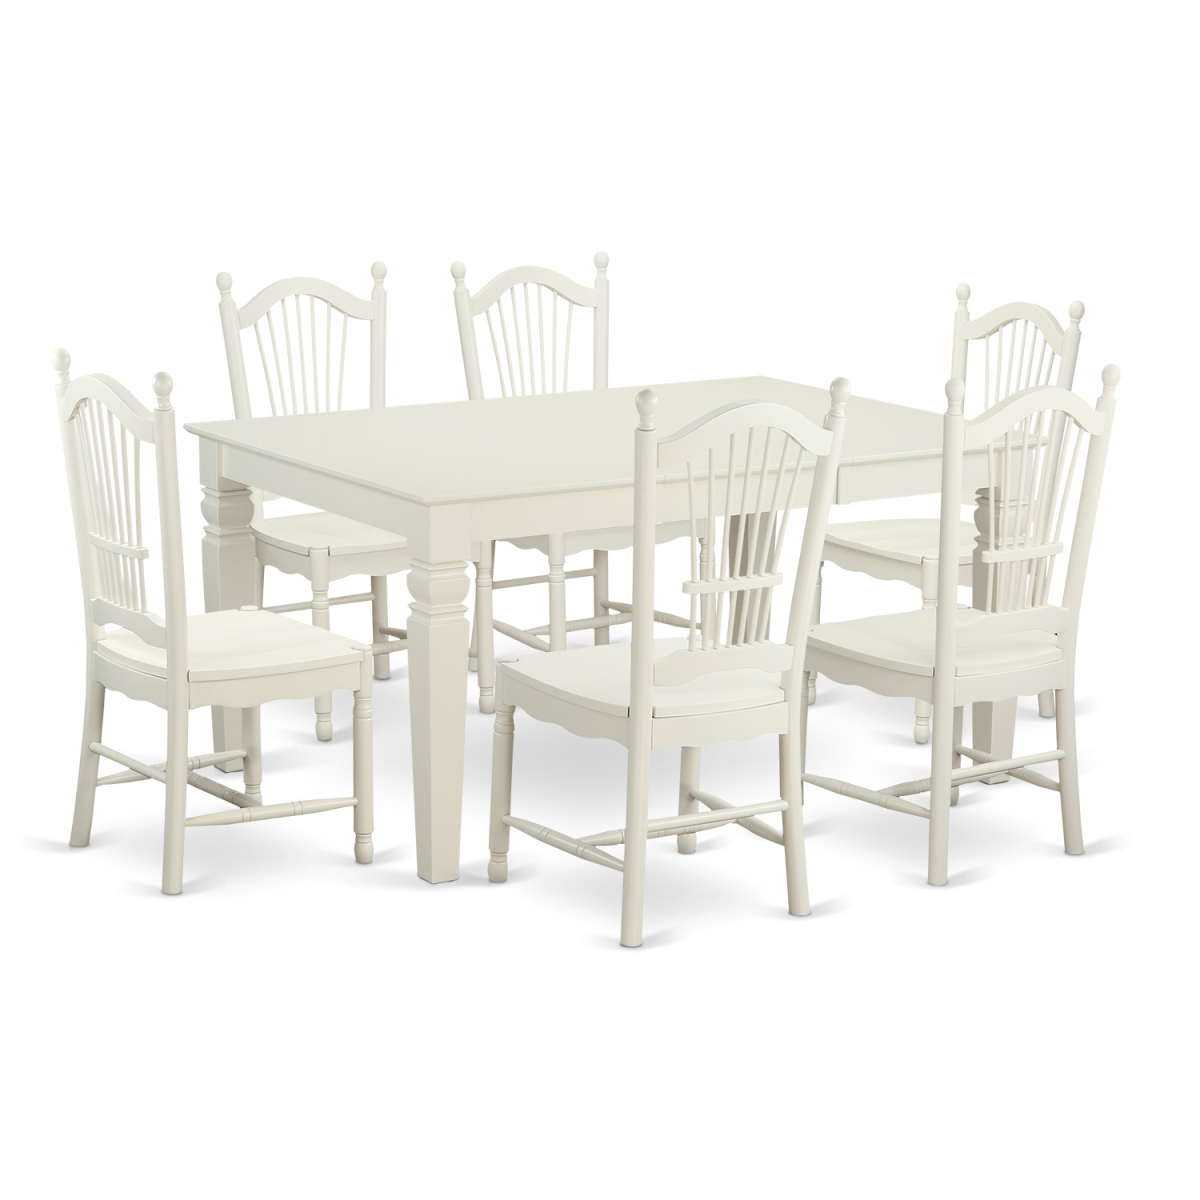 Dinette Table Set - Table & 6 Chairs, Linen White - 7 Piece